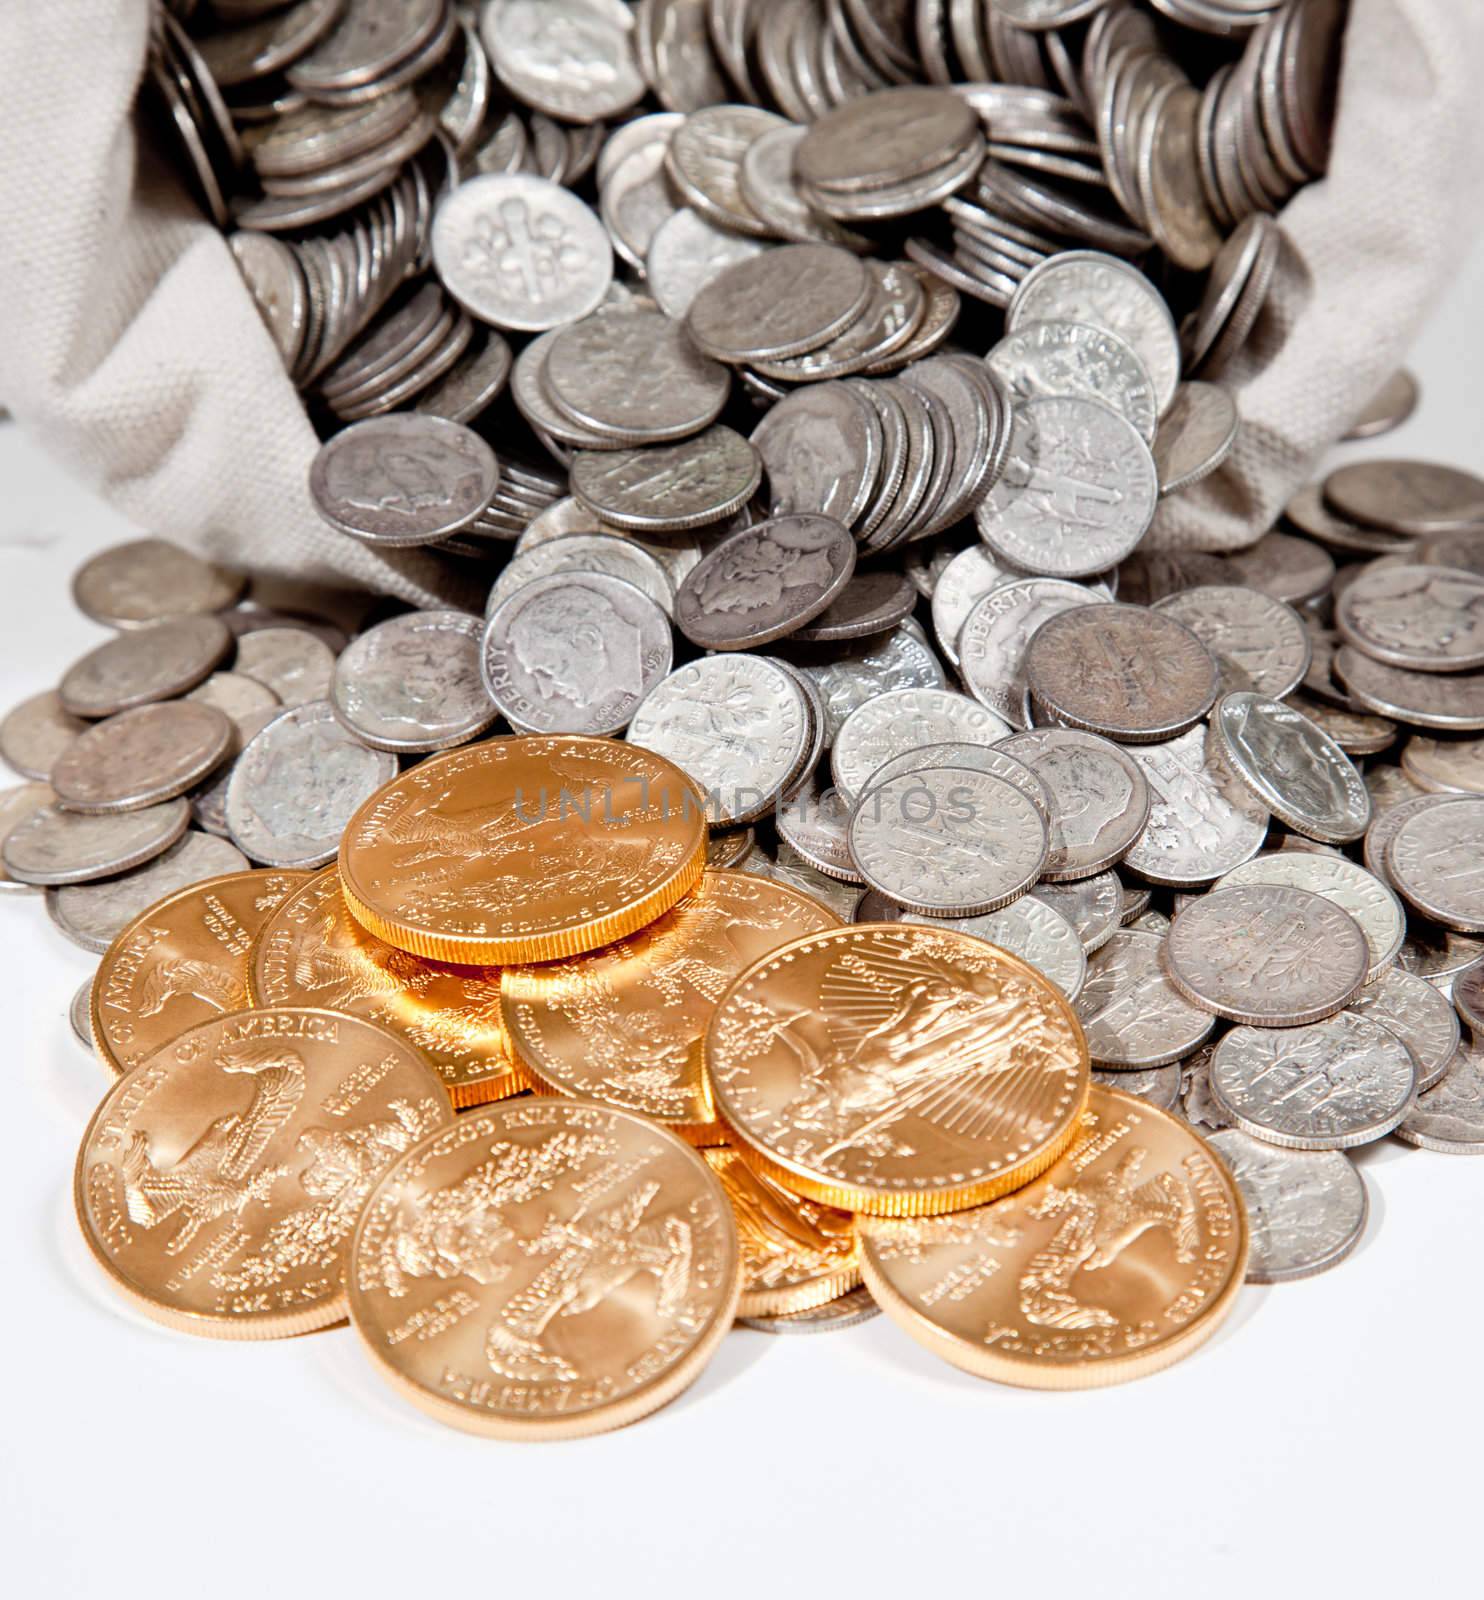 Linen bag of old pure silver coins used to invest in silver as a commodity with a selection of Golden Eagle gold coins